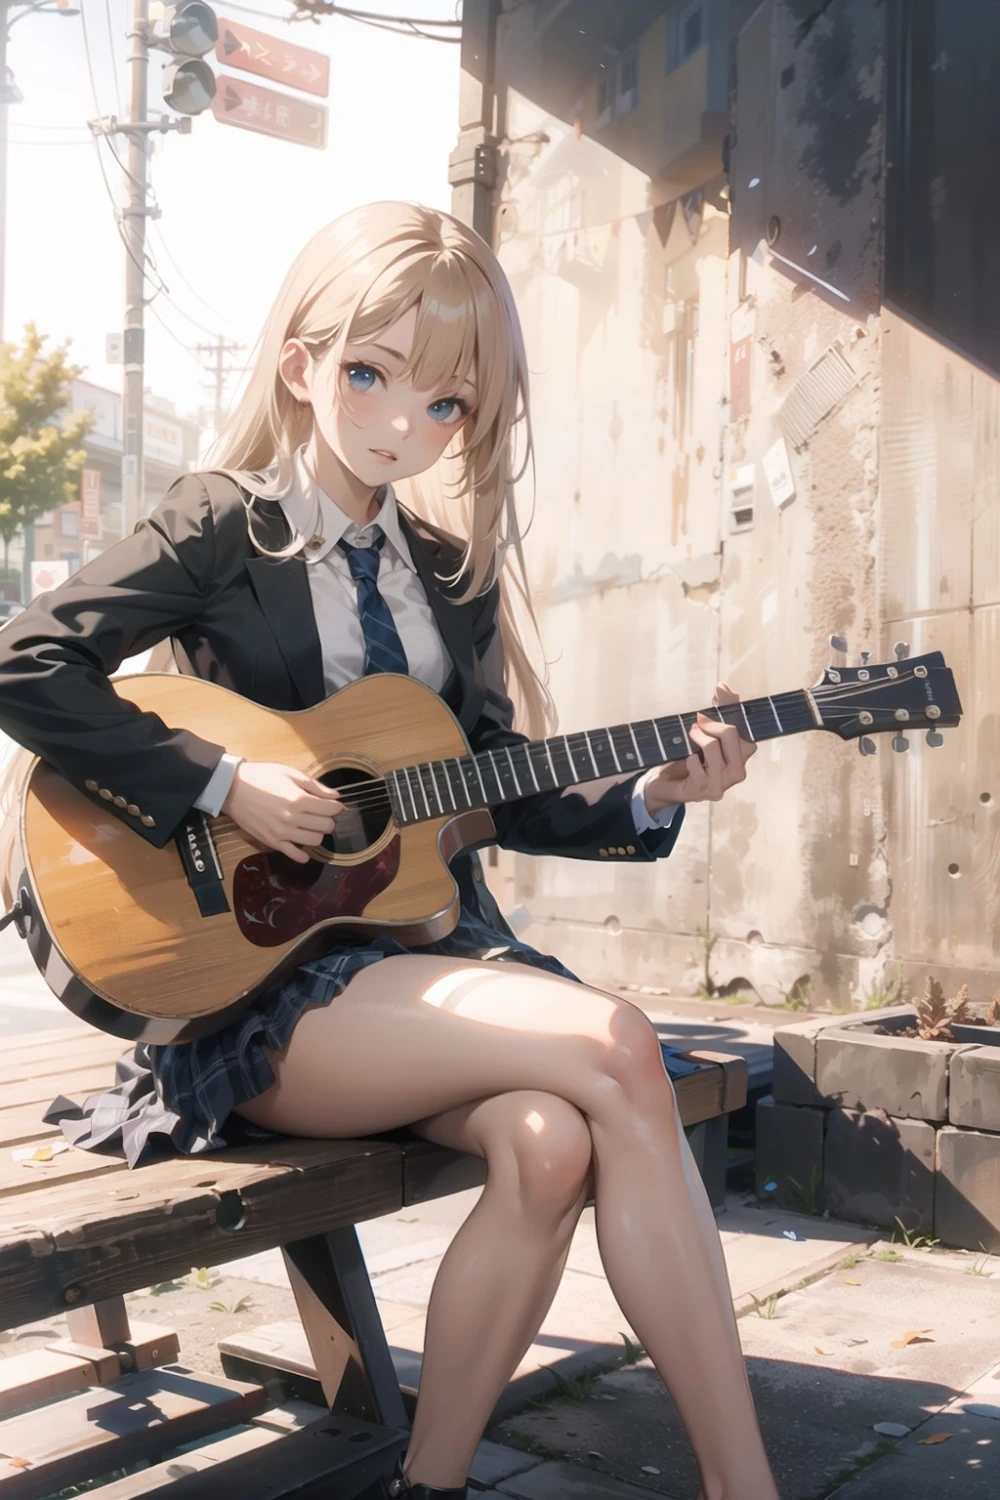 guitar-anime-style-all-ages-50